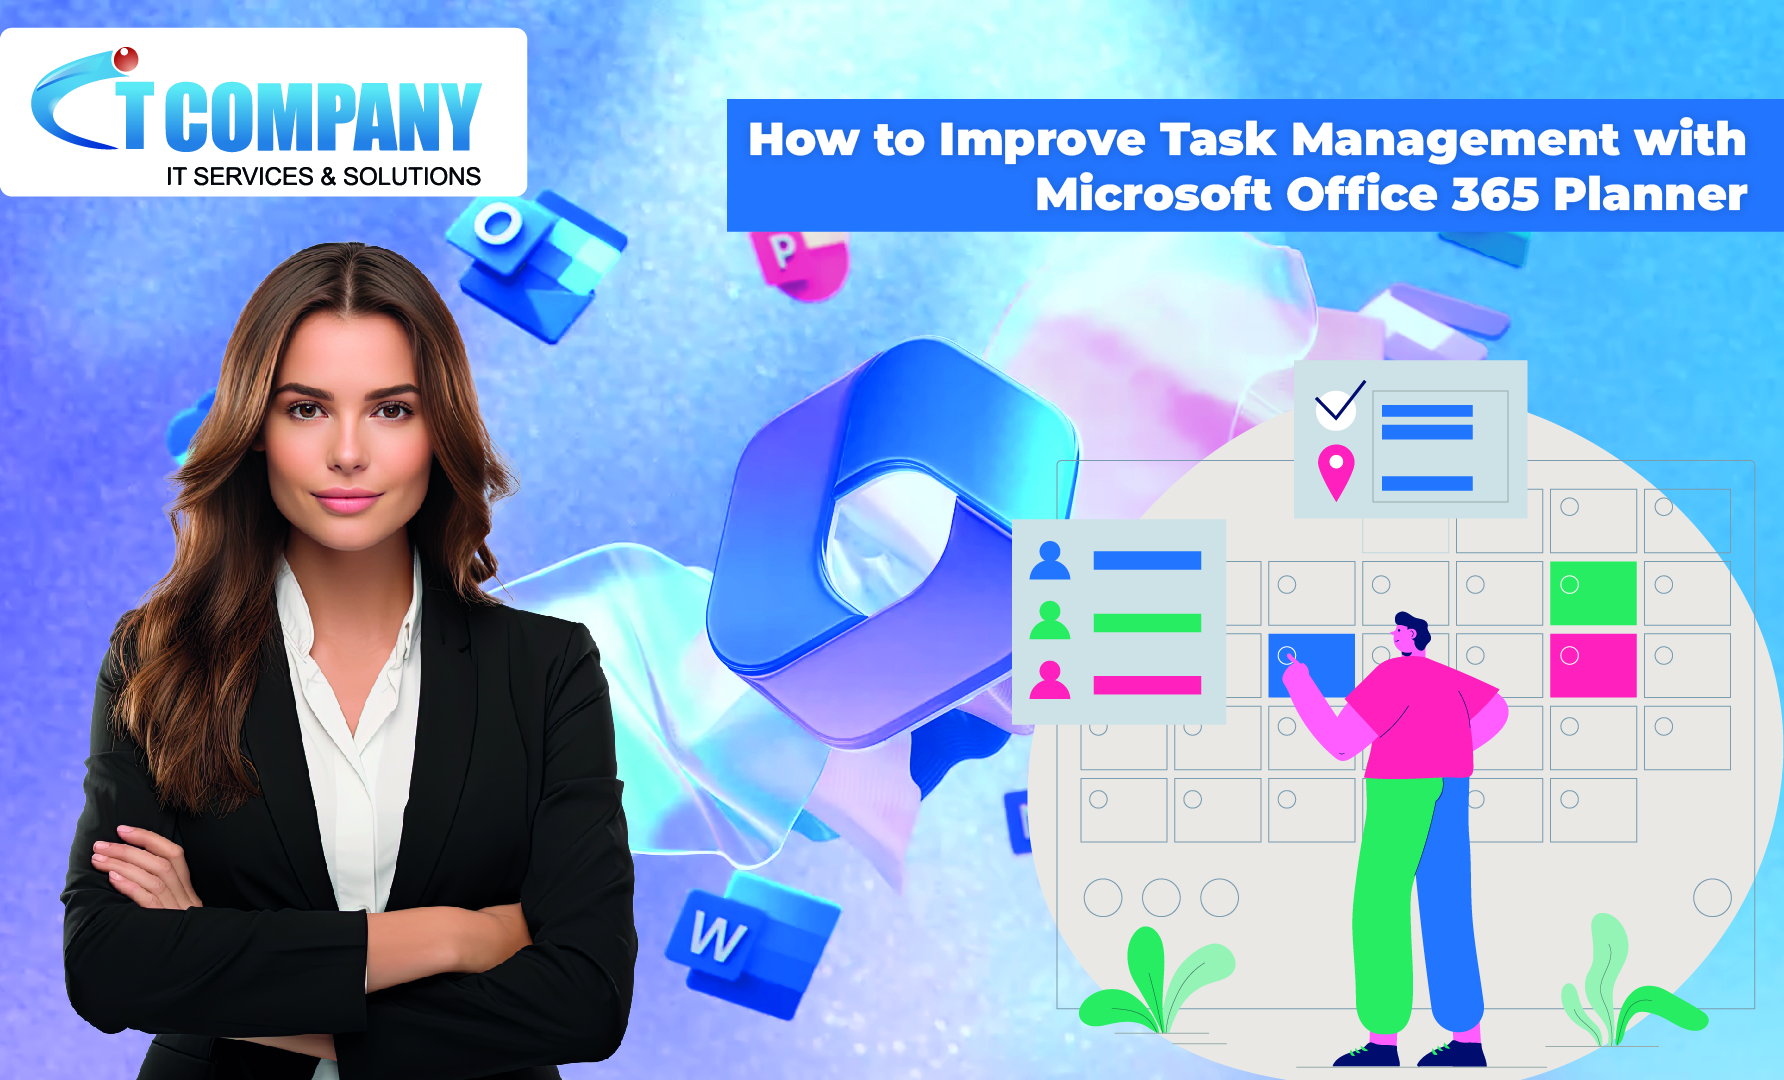 Improve Task Management with Microsoft Office 365 Planner